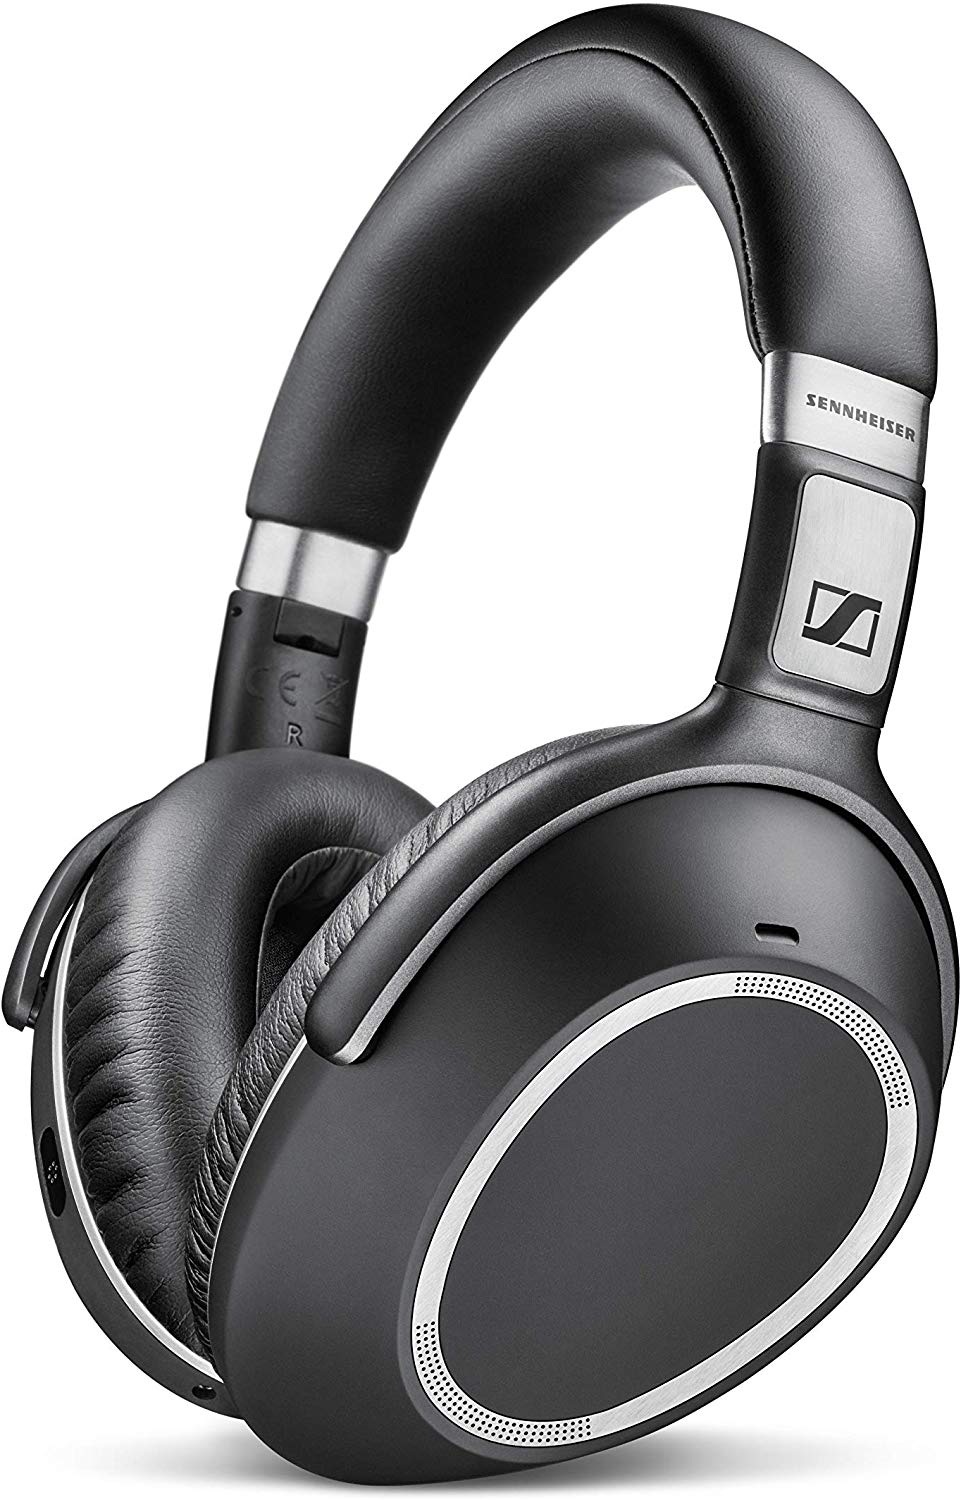 The 8 Best Sennheiser Headphones in 2021 - Reviews and Comparison